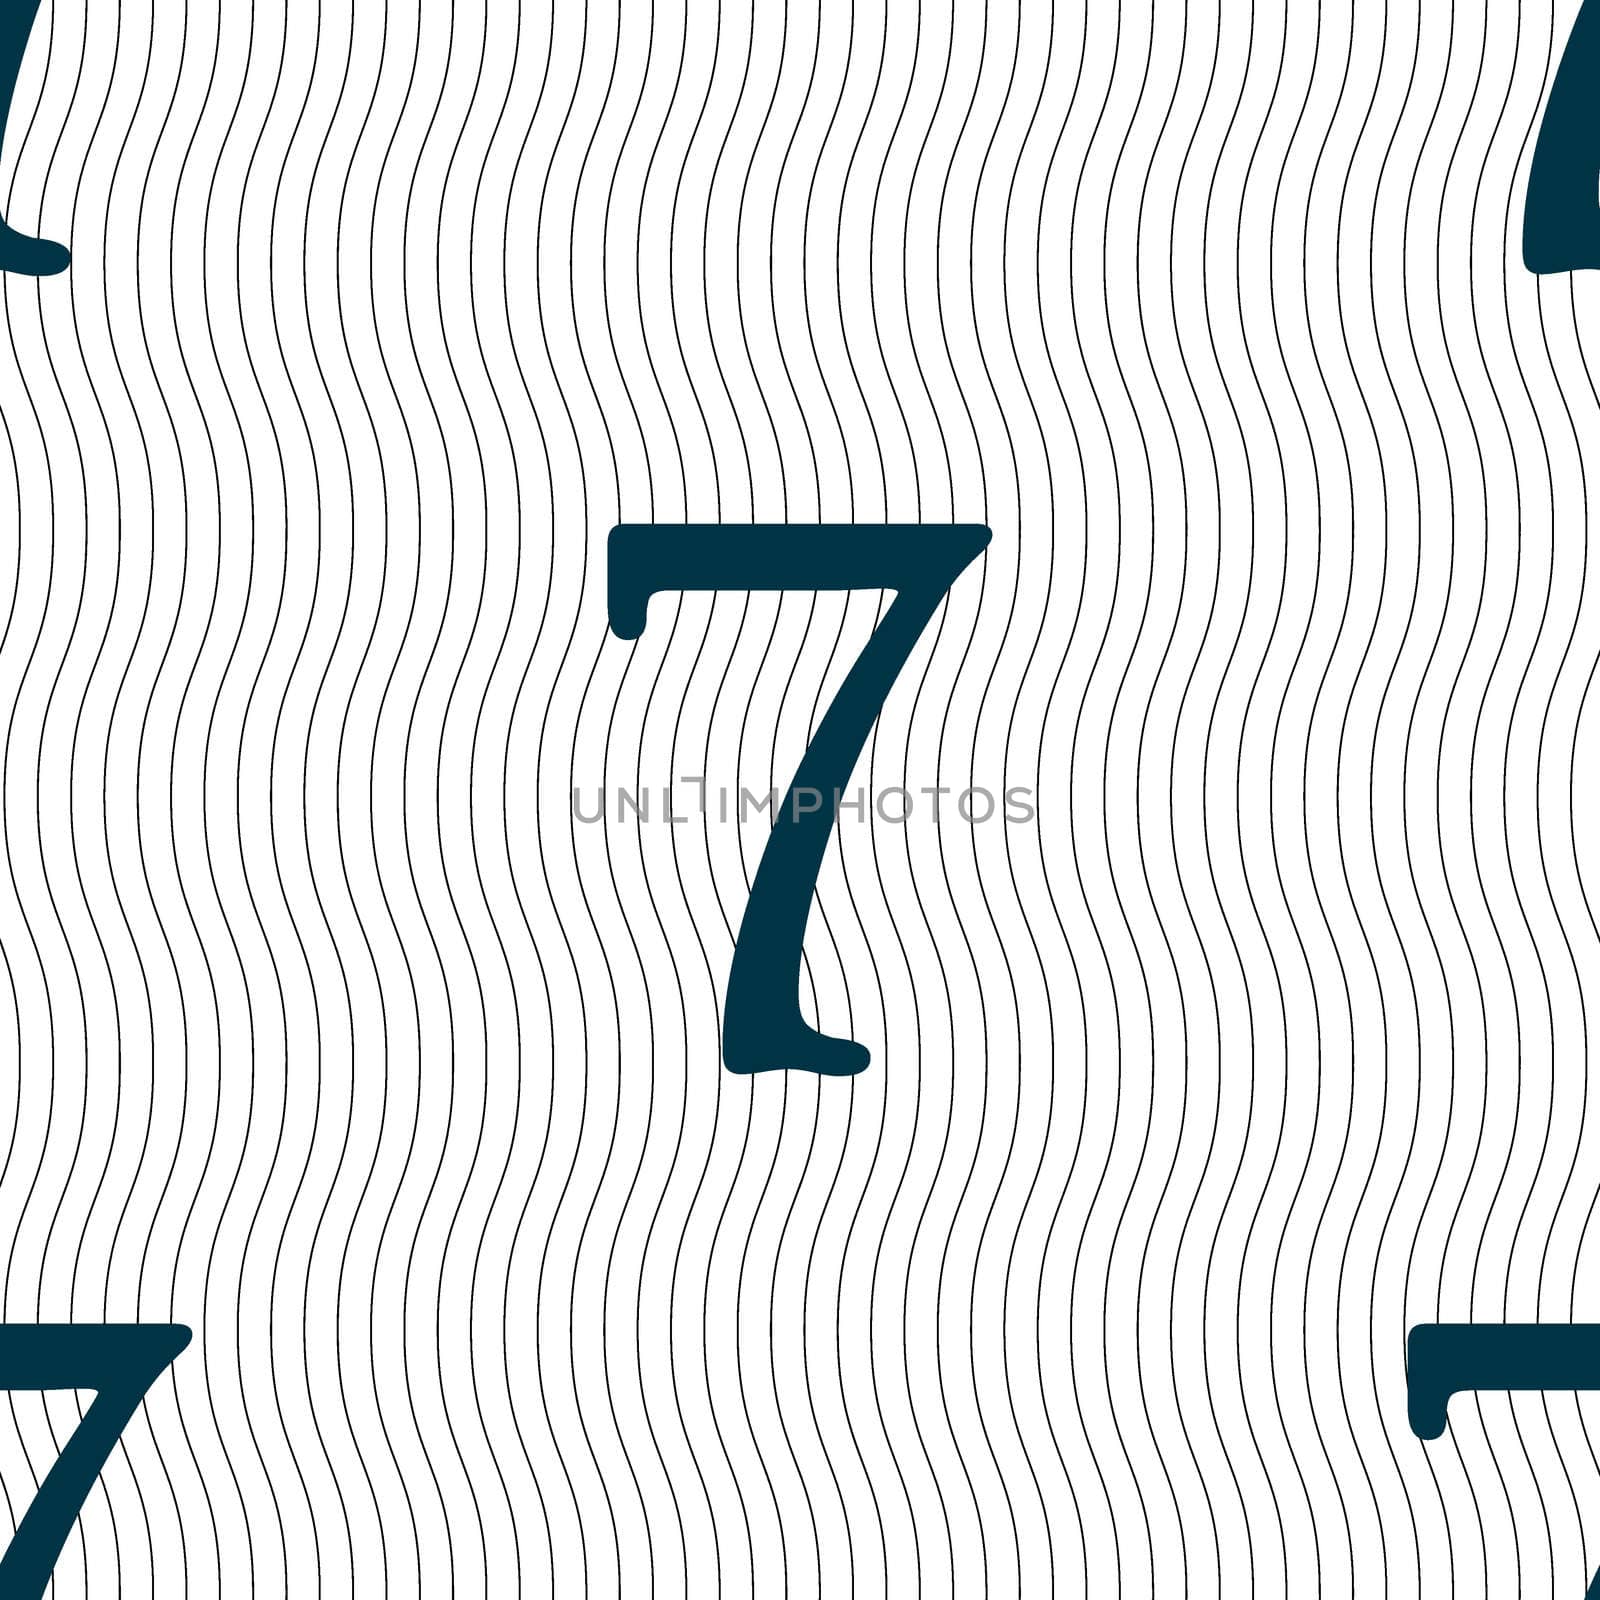 number seven icon sign. Seamless pattern with geometric texture. illustration